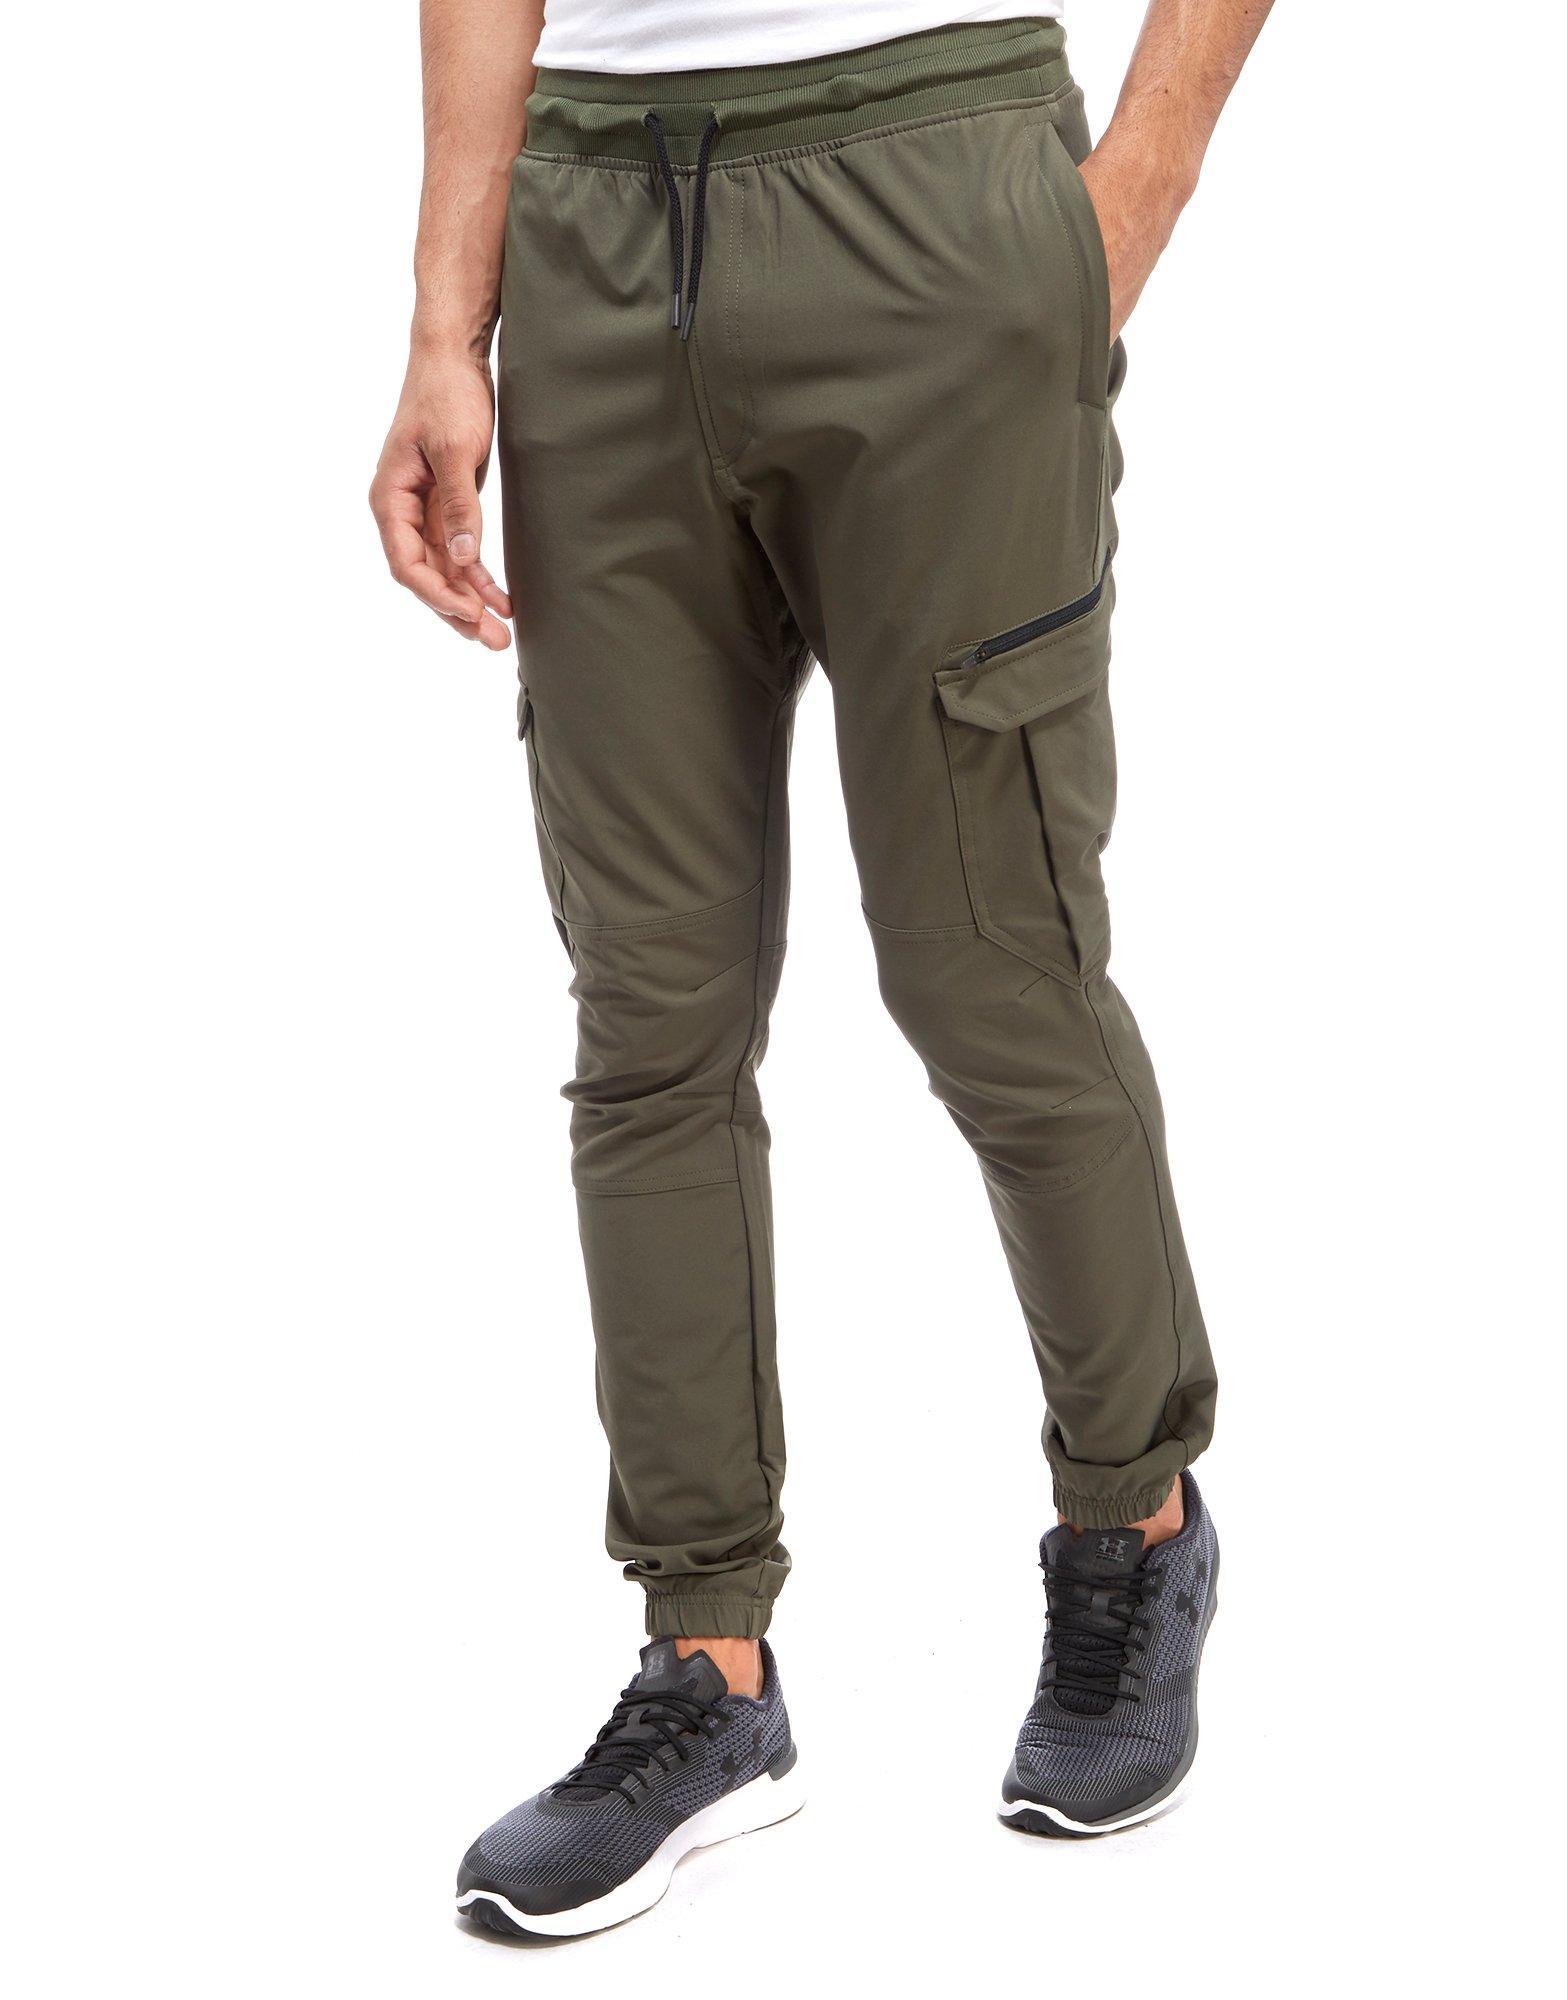 under armour green pants > Off-53%